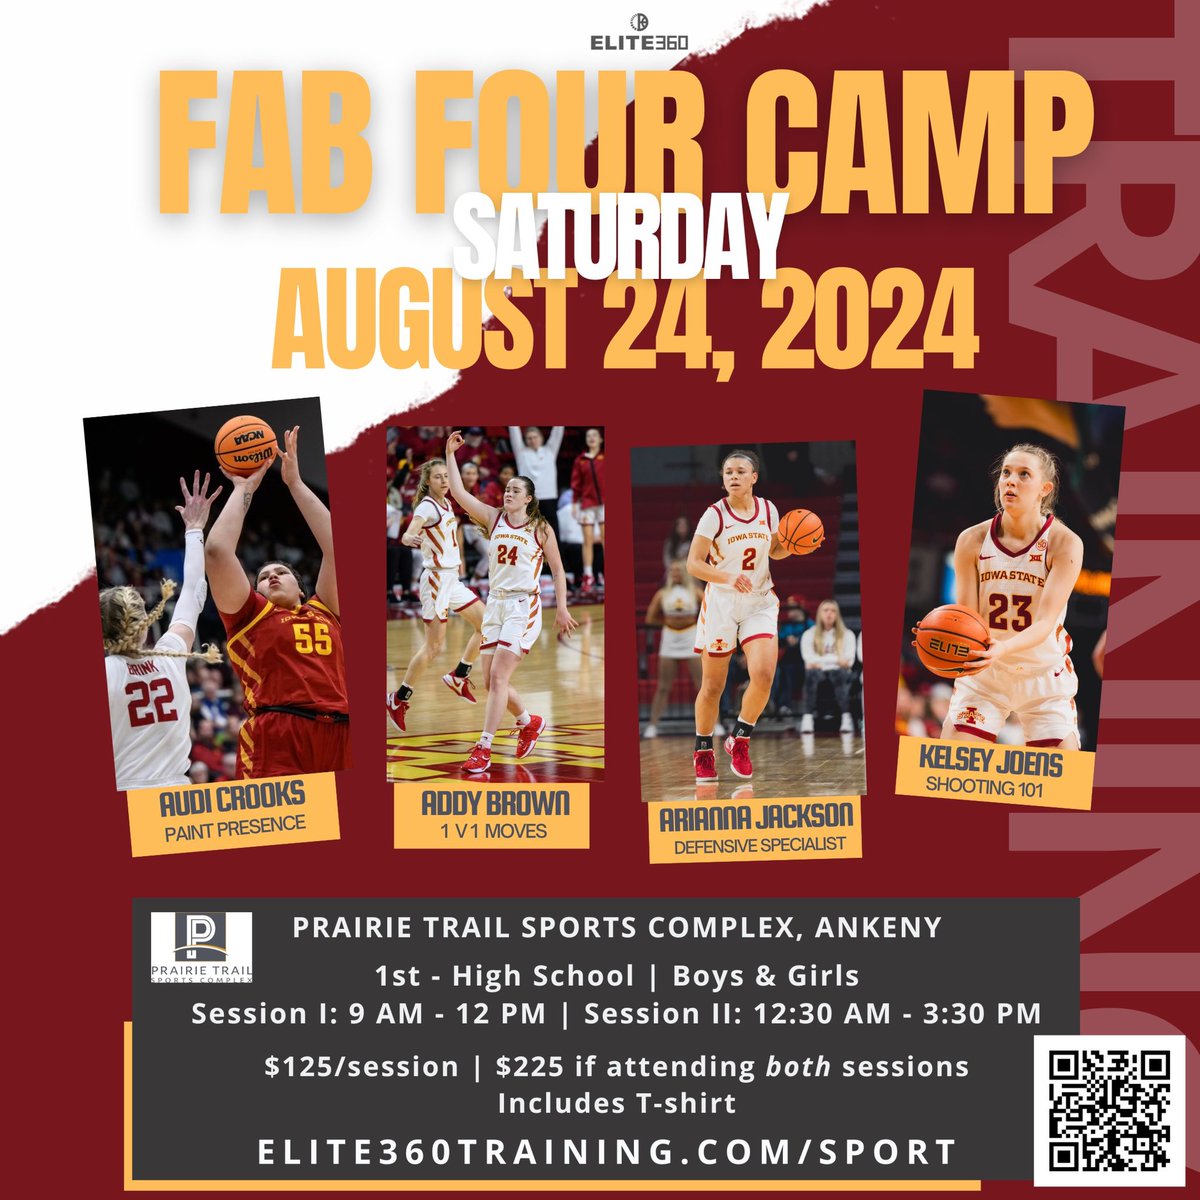 Ready to be a better defender? @a_jackson2205 will teach you more on defense & help you improve your skills at the Fab Four Camp on Aug 24 at @PrairieTrailSC Join her @AudiCrooks @Addy_Brown24 & @kelseyjoens for a fun, empowering & energizing camp! ➡️ elite360training.com/sport